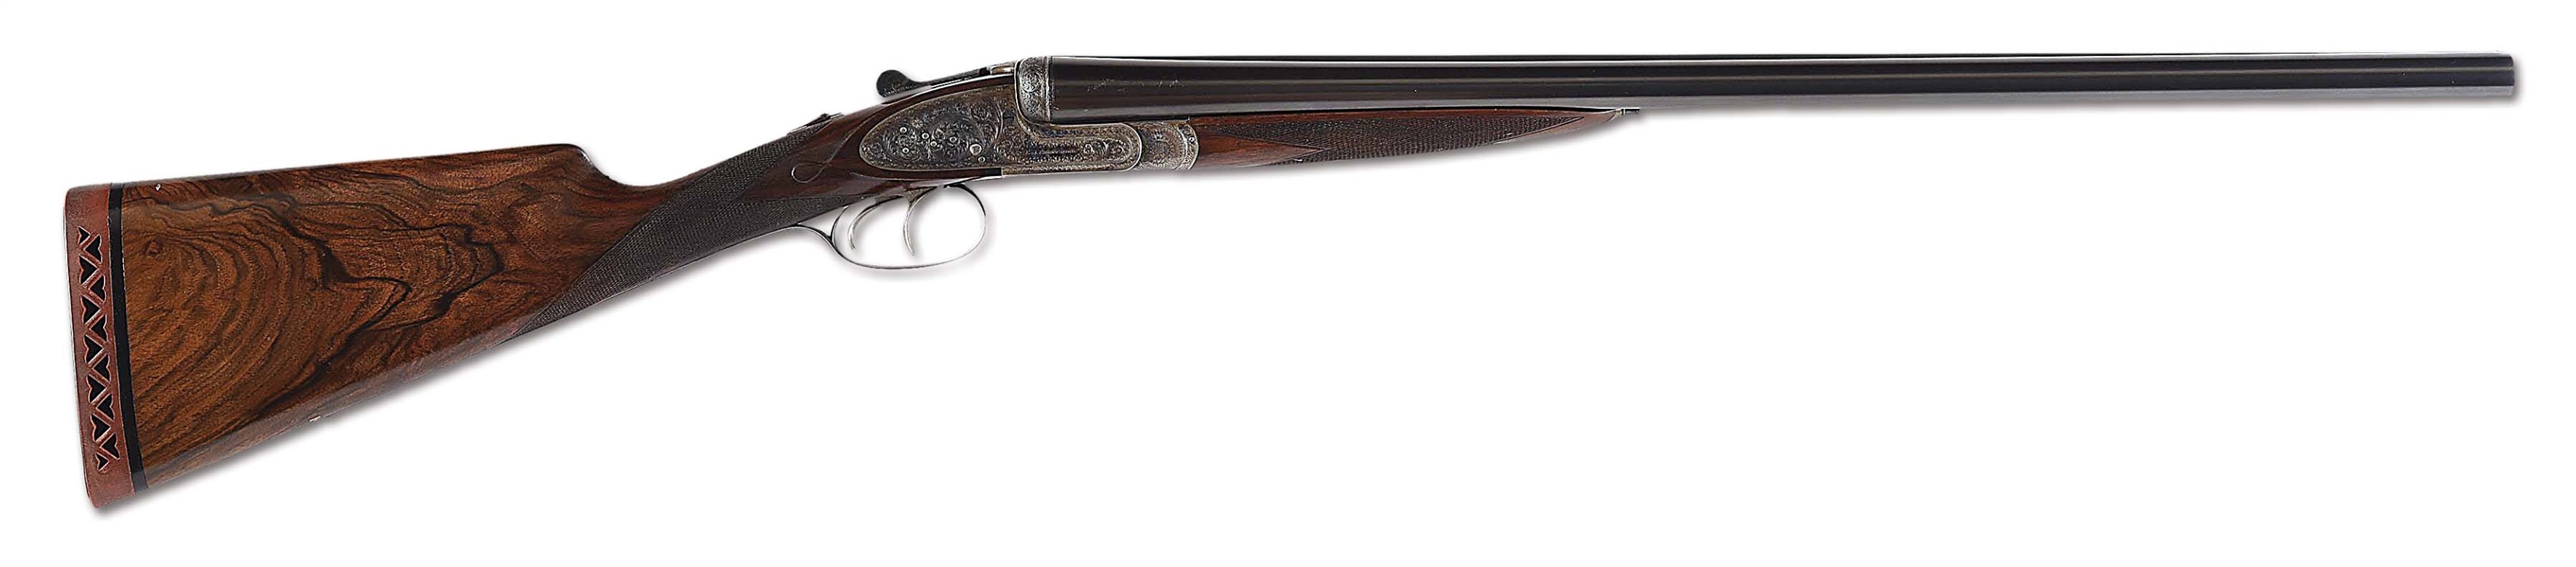 (C) MARCELLUS HARTLEY DODGE SR.S (CHAIRMAN OF THE BOARD OF REMINGTON ARMS) E. J. CHURCHILL "IMPERIAL" GRADE SIDELOCK EJECTOR "XXV" SHOTGUN WITH CASE AND ACCESSORIES.